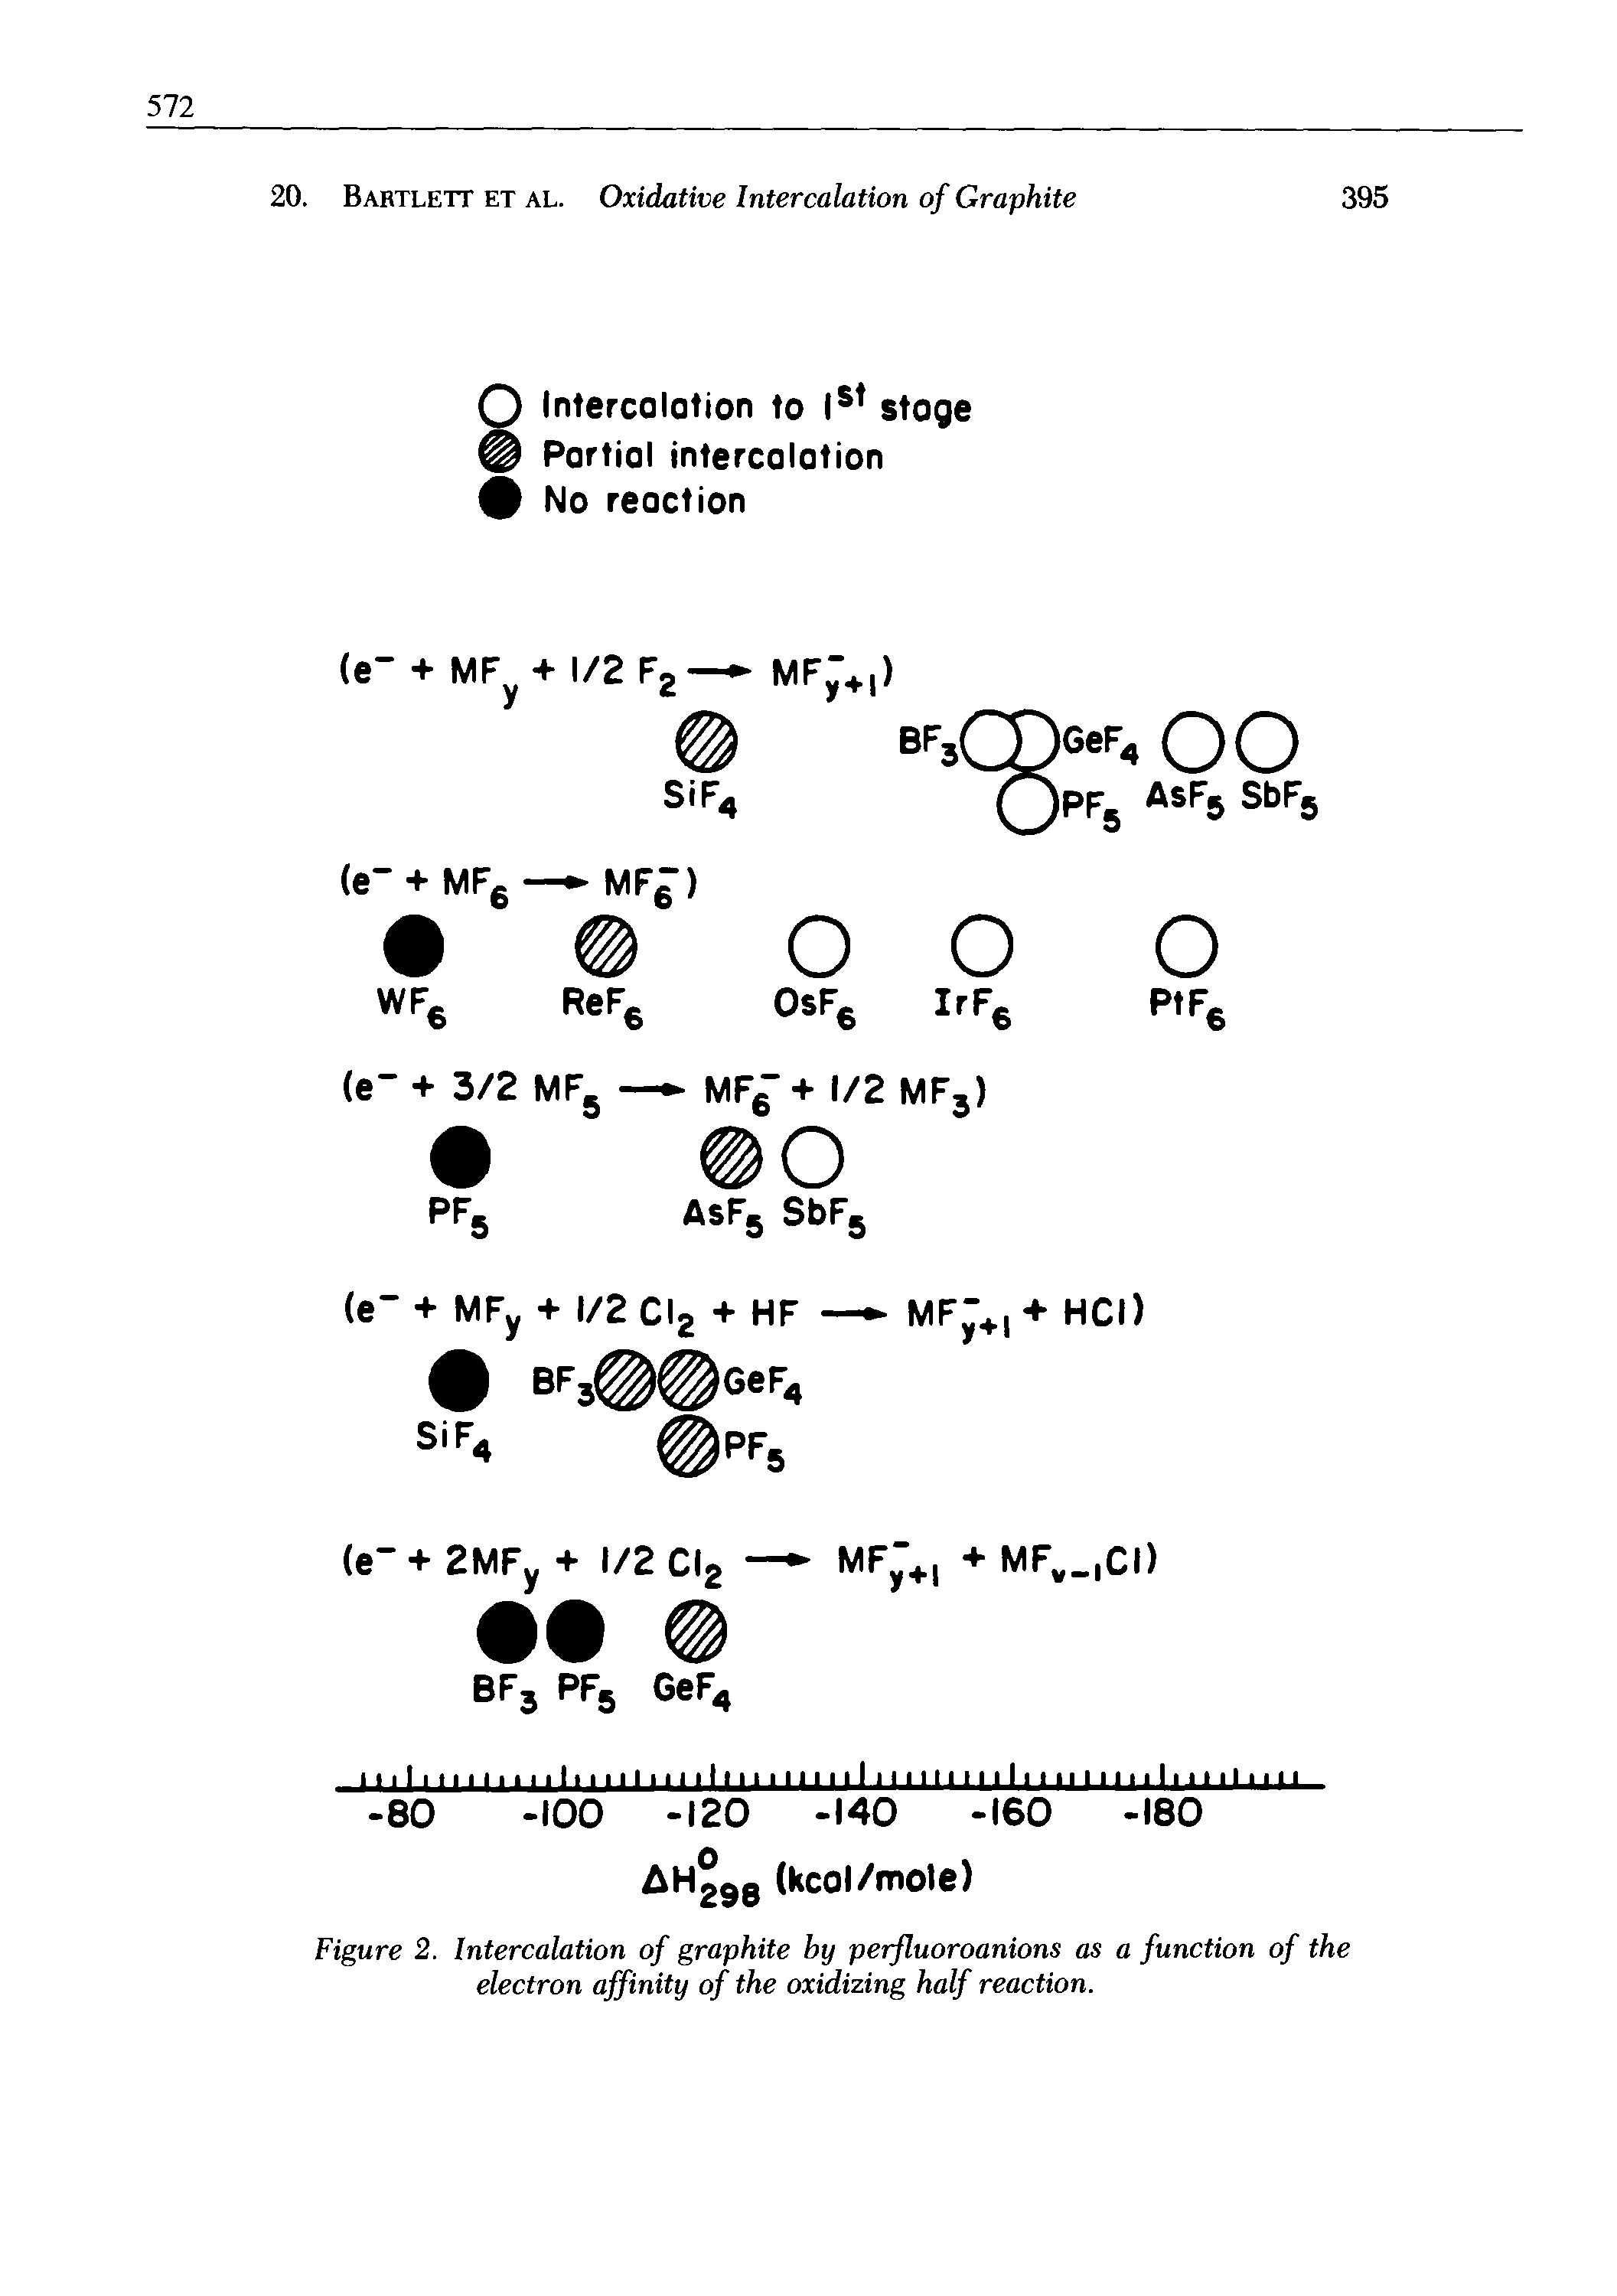 Figure 2. Intercalation of graphite hy perfluoroanions as a function of the electron affinity of the oxidizing half reaction.